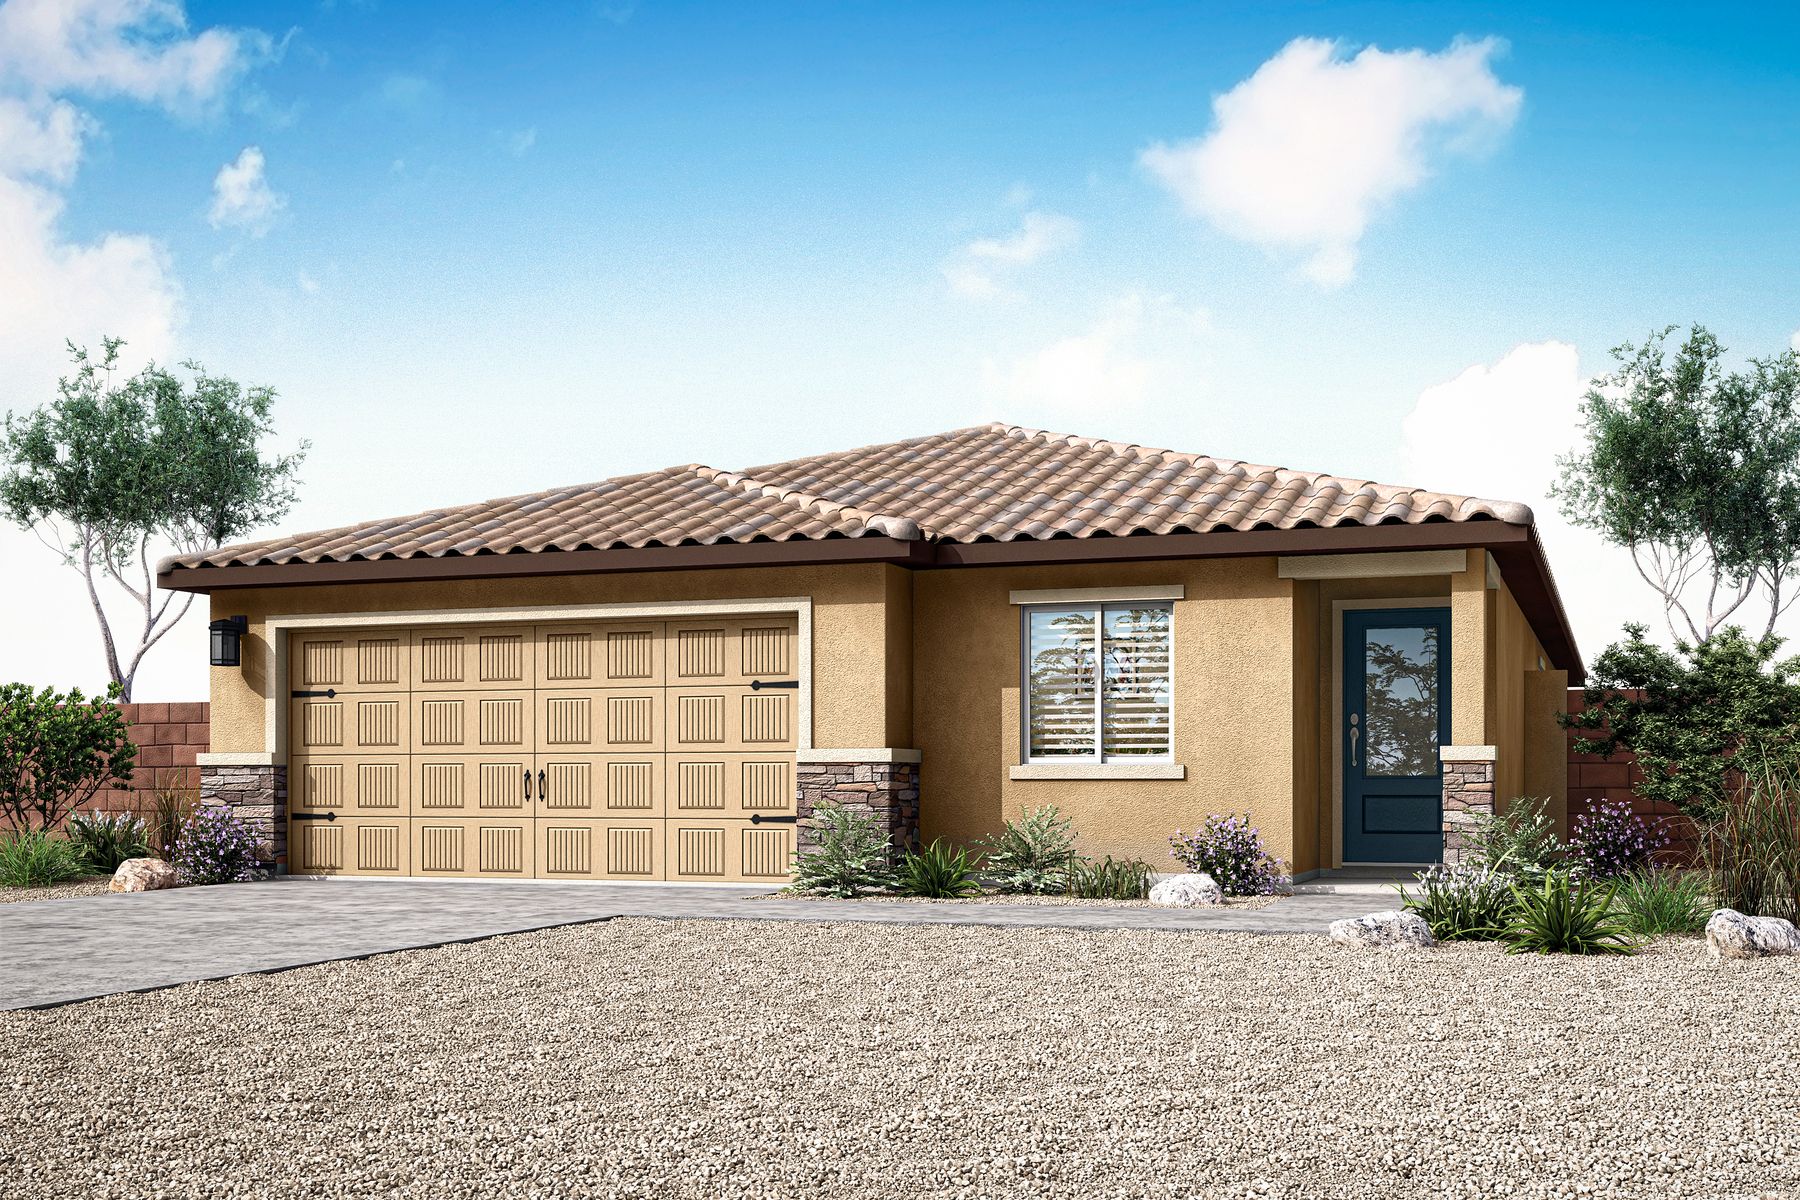 Rendering of the Payson at Bisbee Ranch.:LGI Homes at Bisbee Ranch